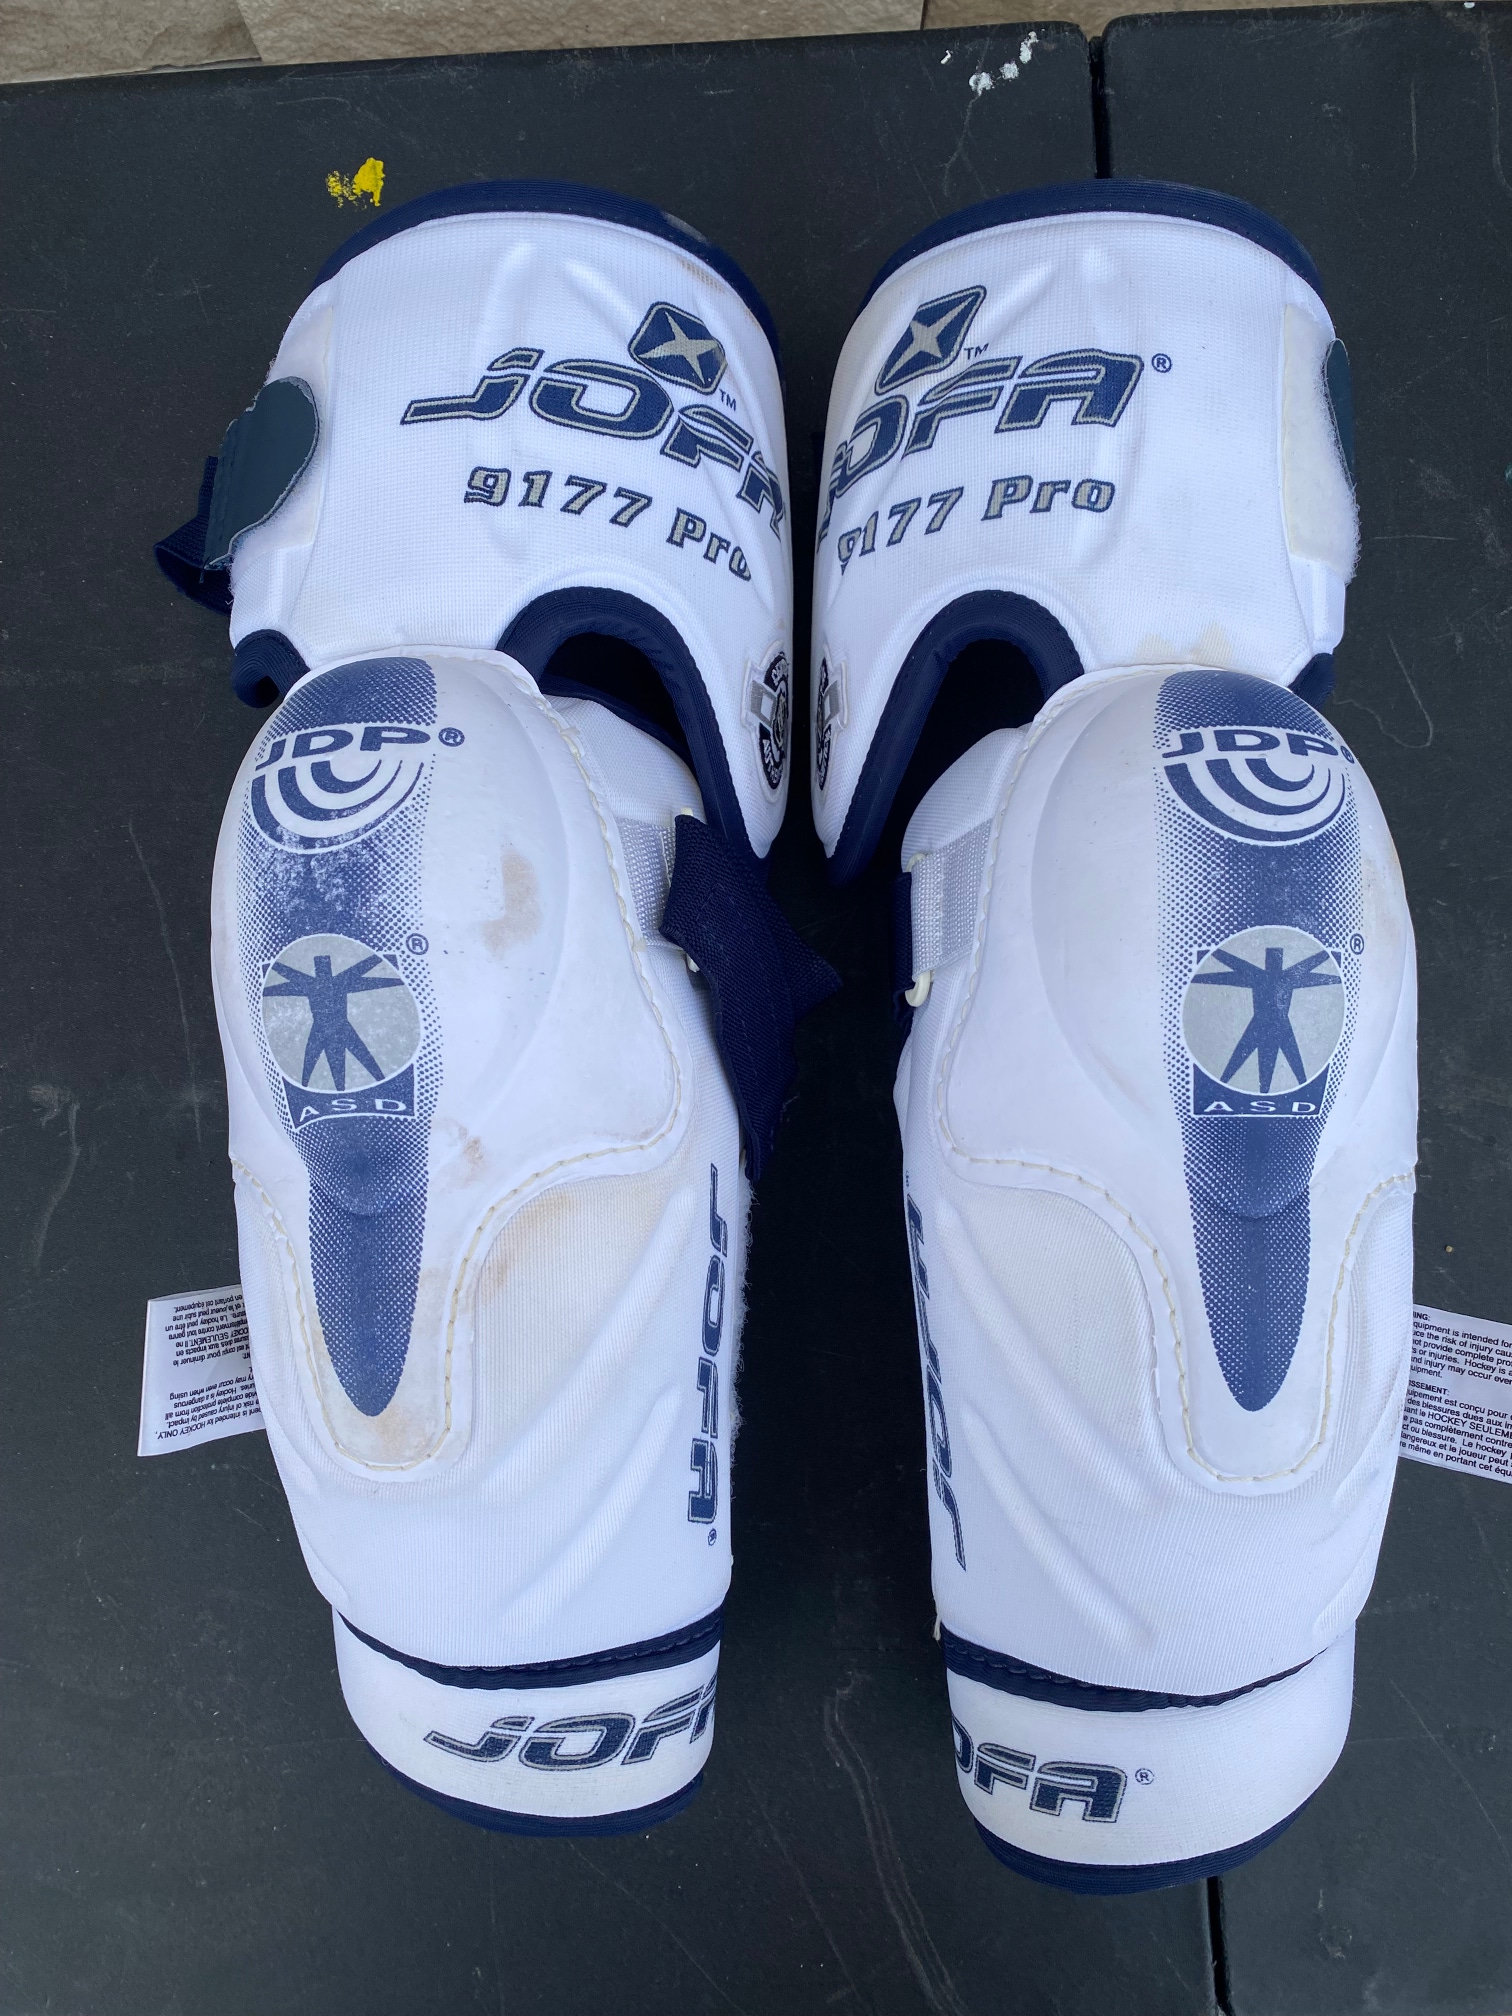 Reebok JOFA 9177 Pro Stock Hockey Elbow Pads Size 6 Large Extended Foream Pads 3979